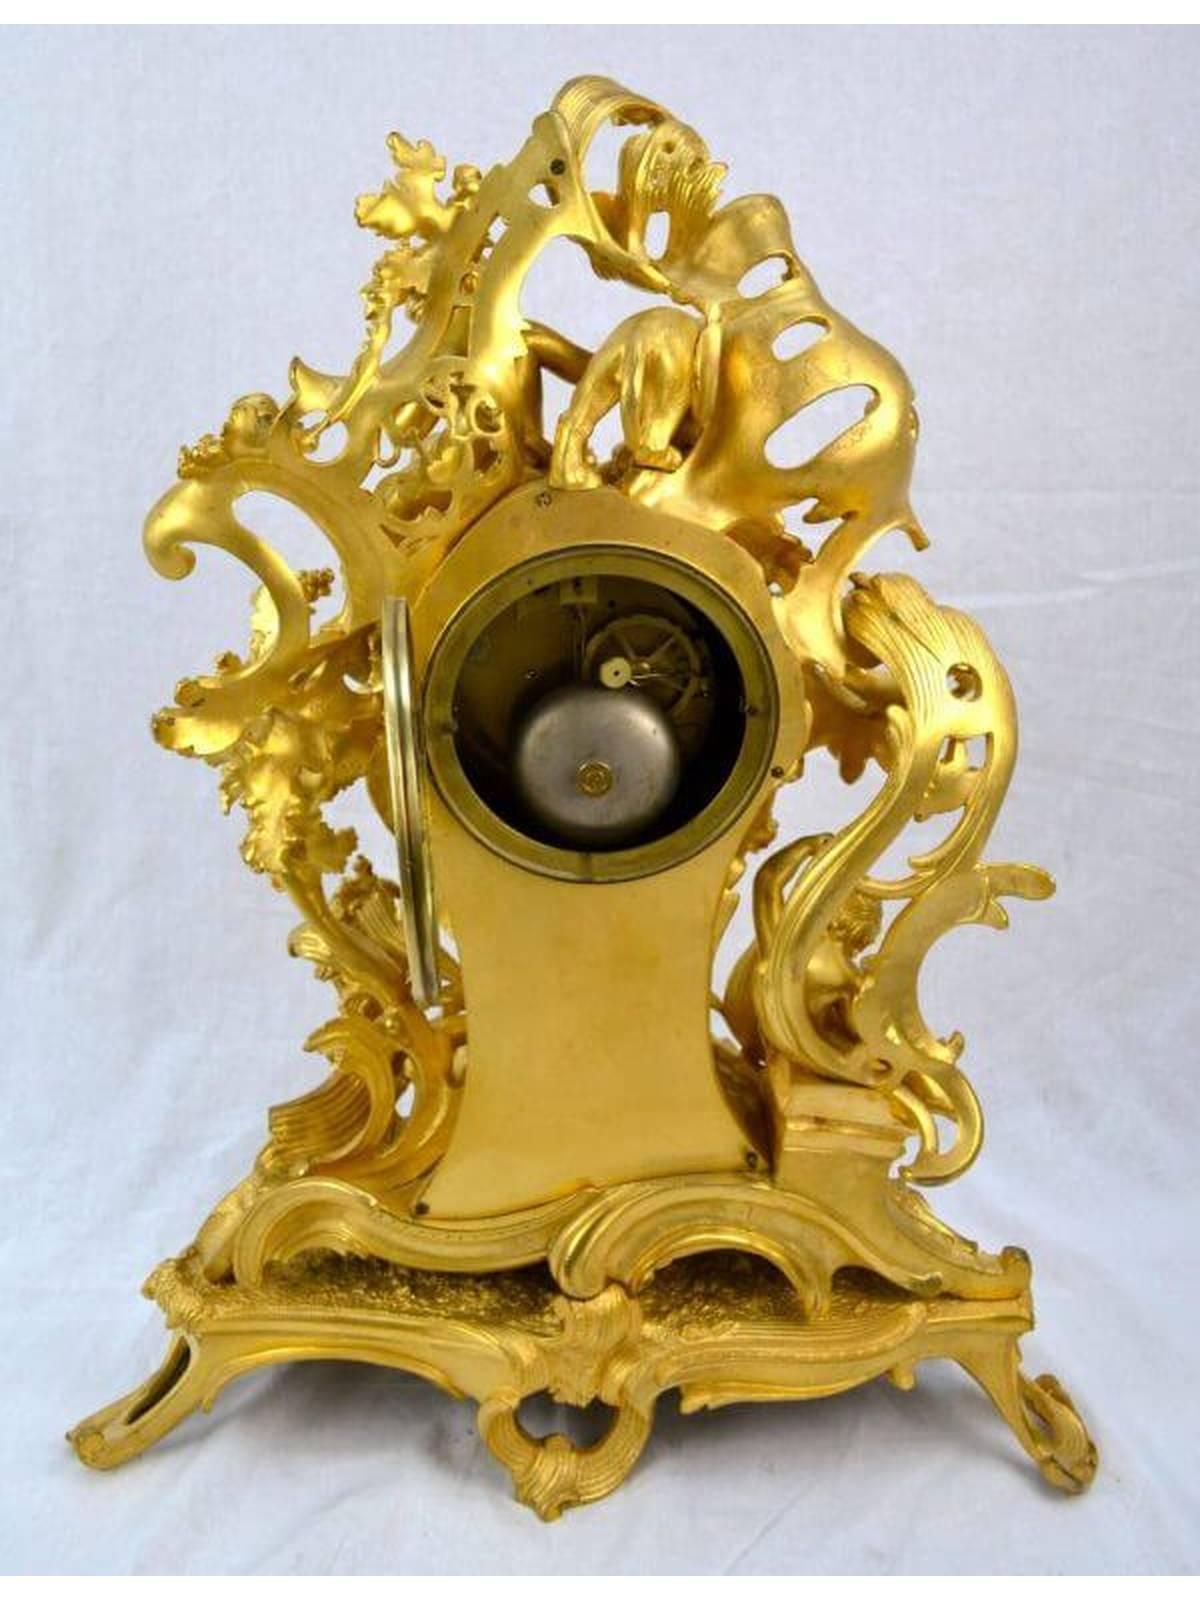 The case of this mantle clock is entirely of gilded bronze and represents the epitome of the Rococo revivalist style in mid-late 19th century France. Leafy scrolls entwine the entire case, the dial comprises inset white enamel plaques with blue